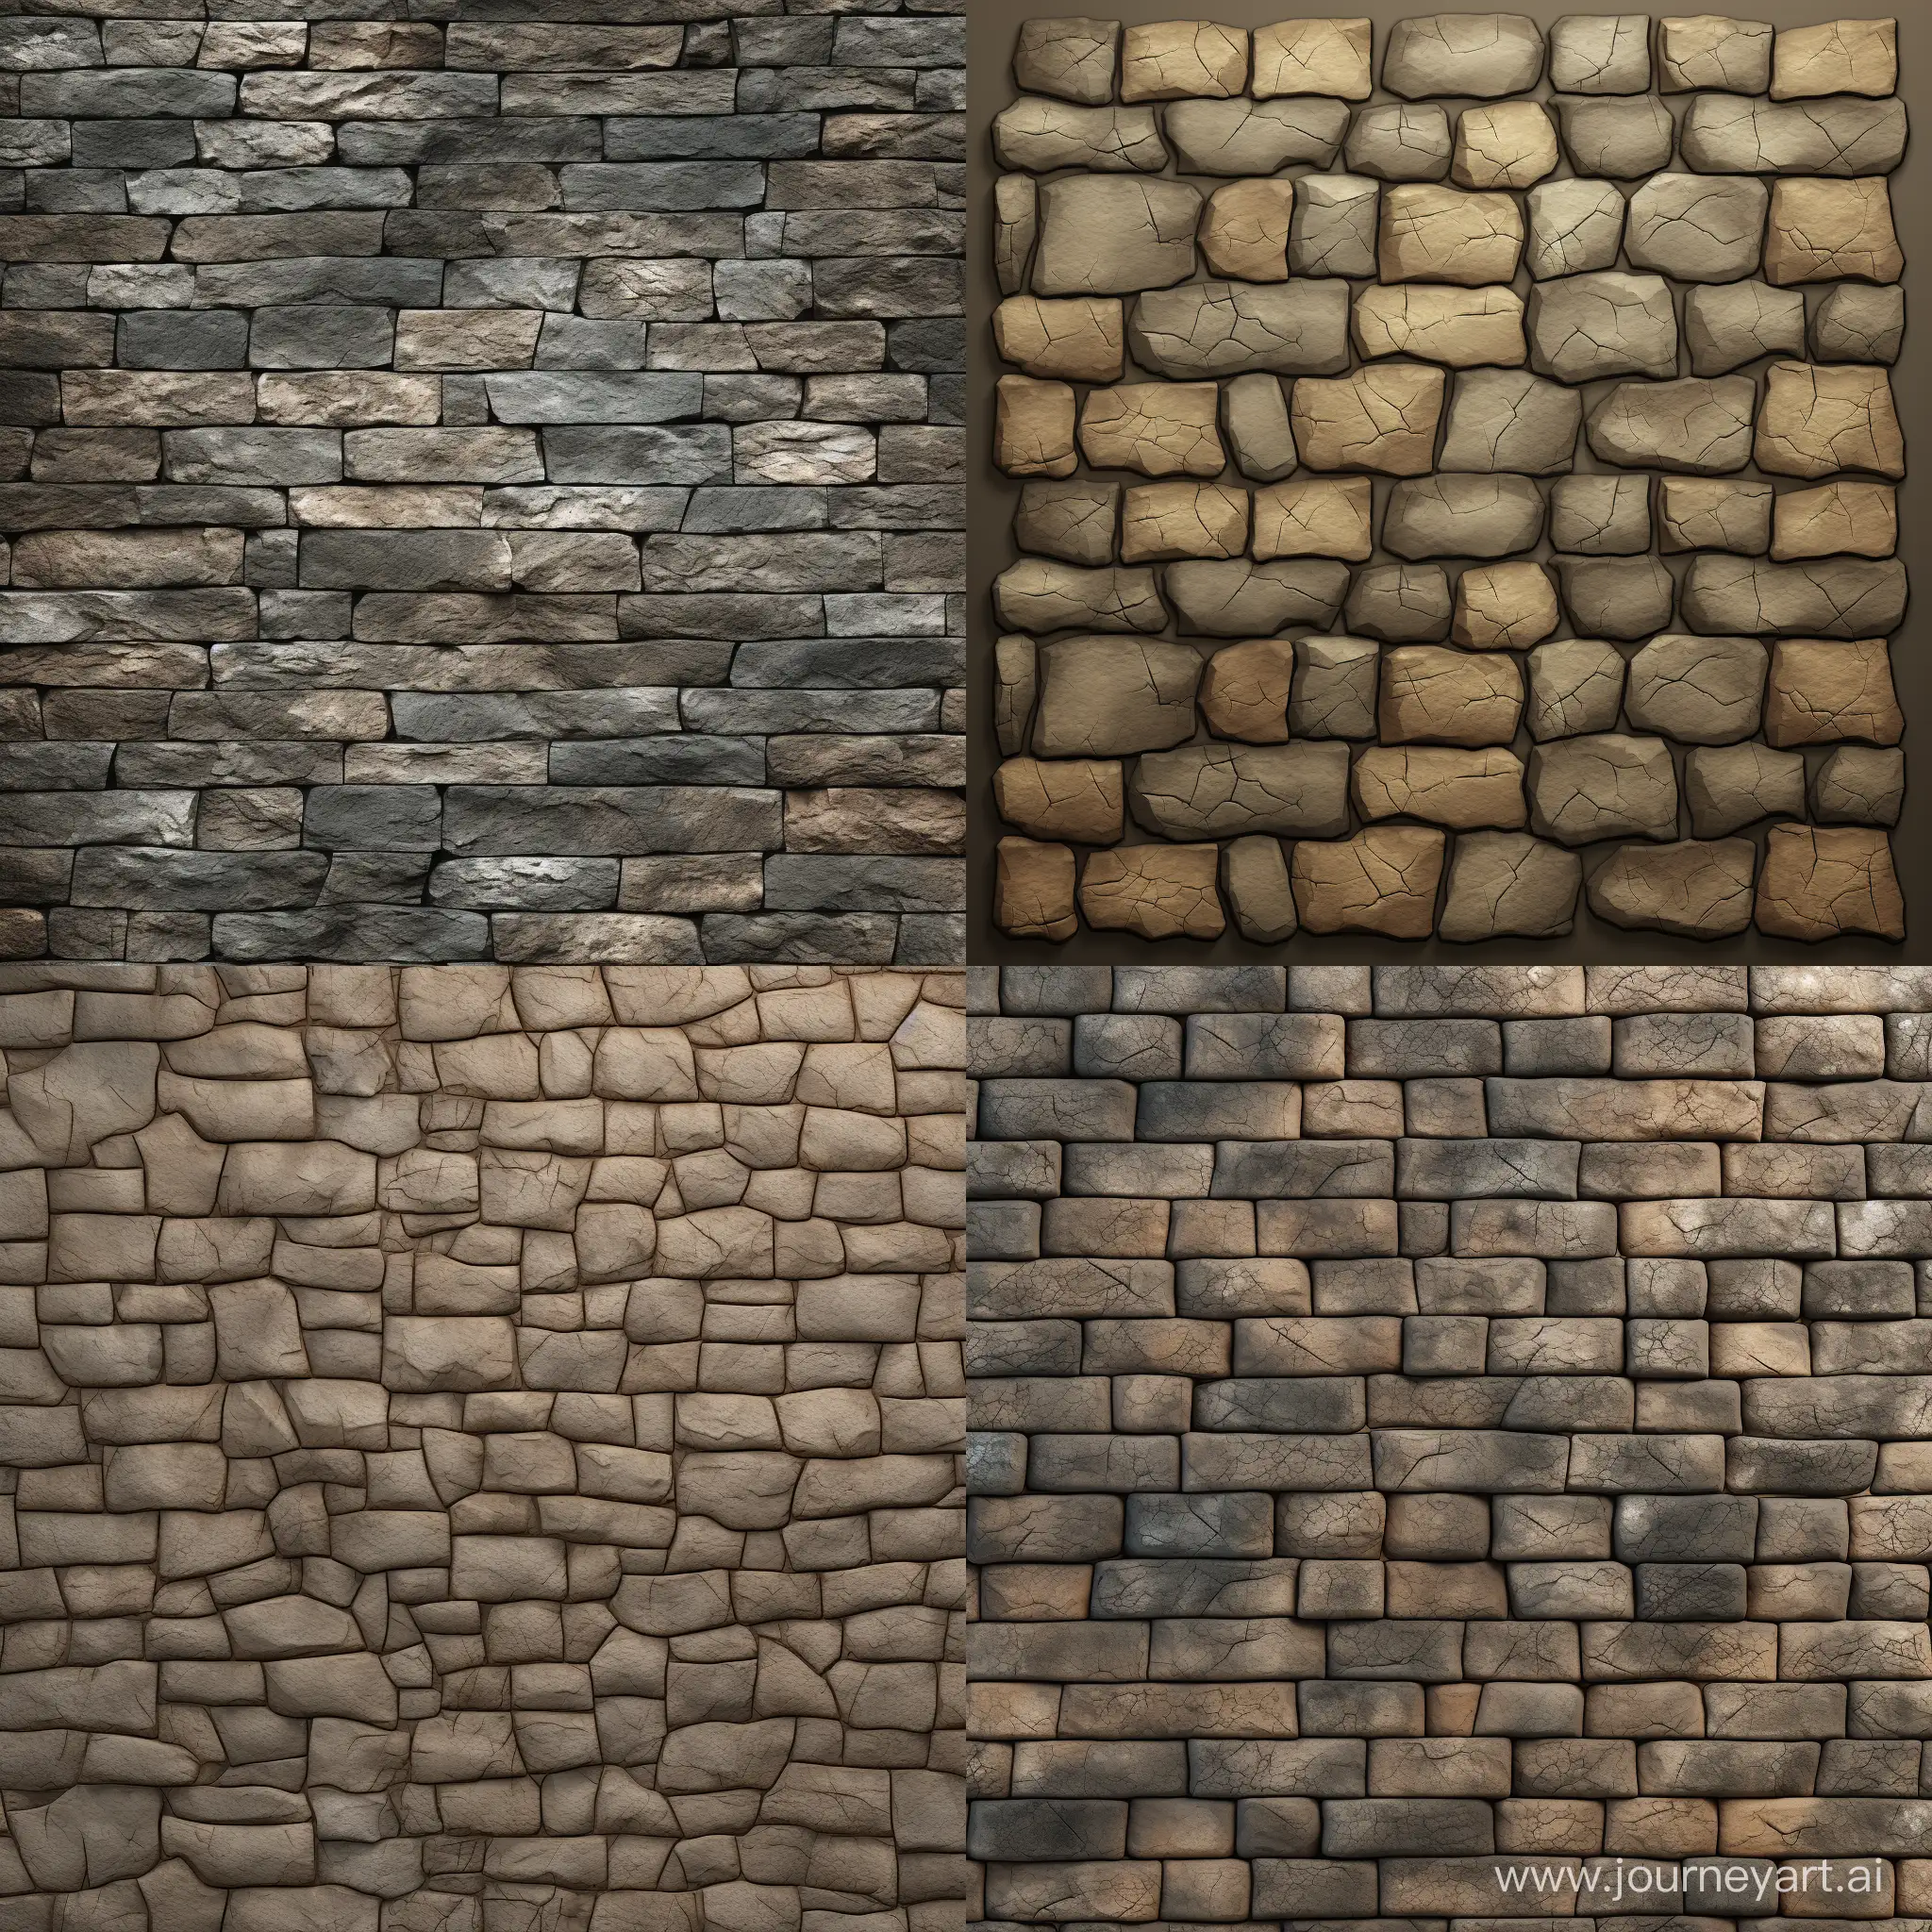 Stylized-Seamless-Andesite-Brick-Wall-in-High-Quality-11-Aspect-Ratio